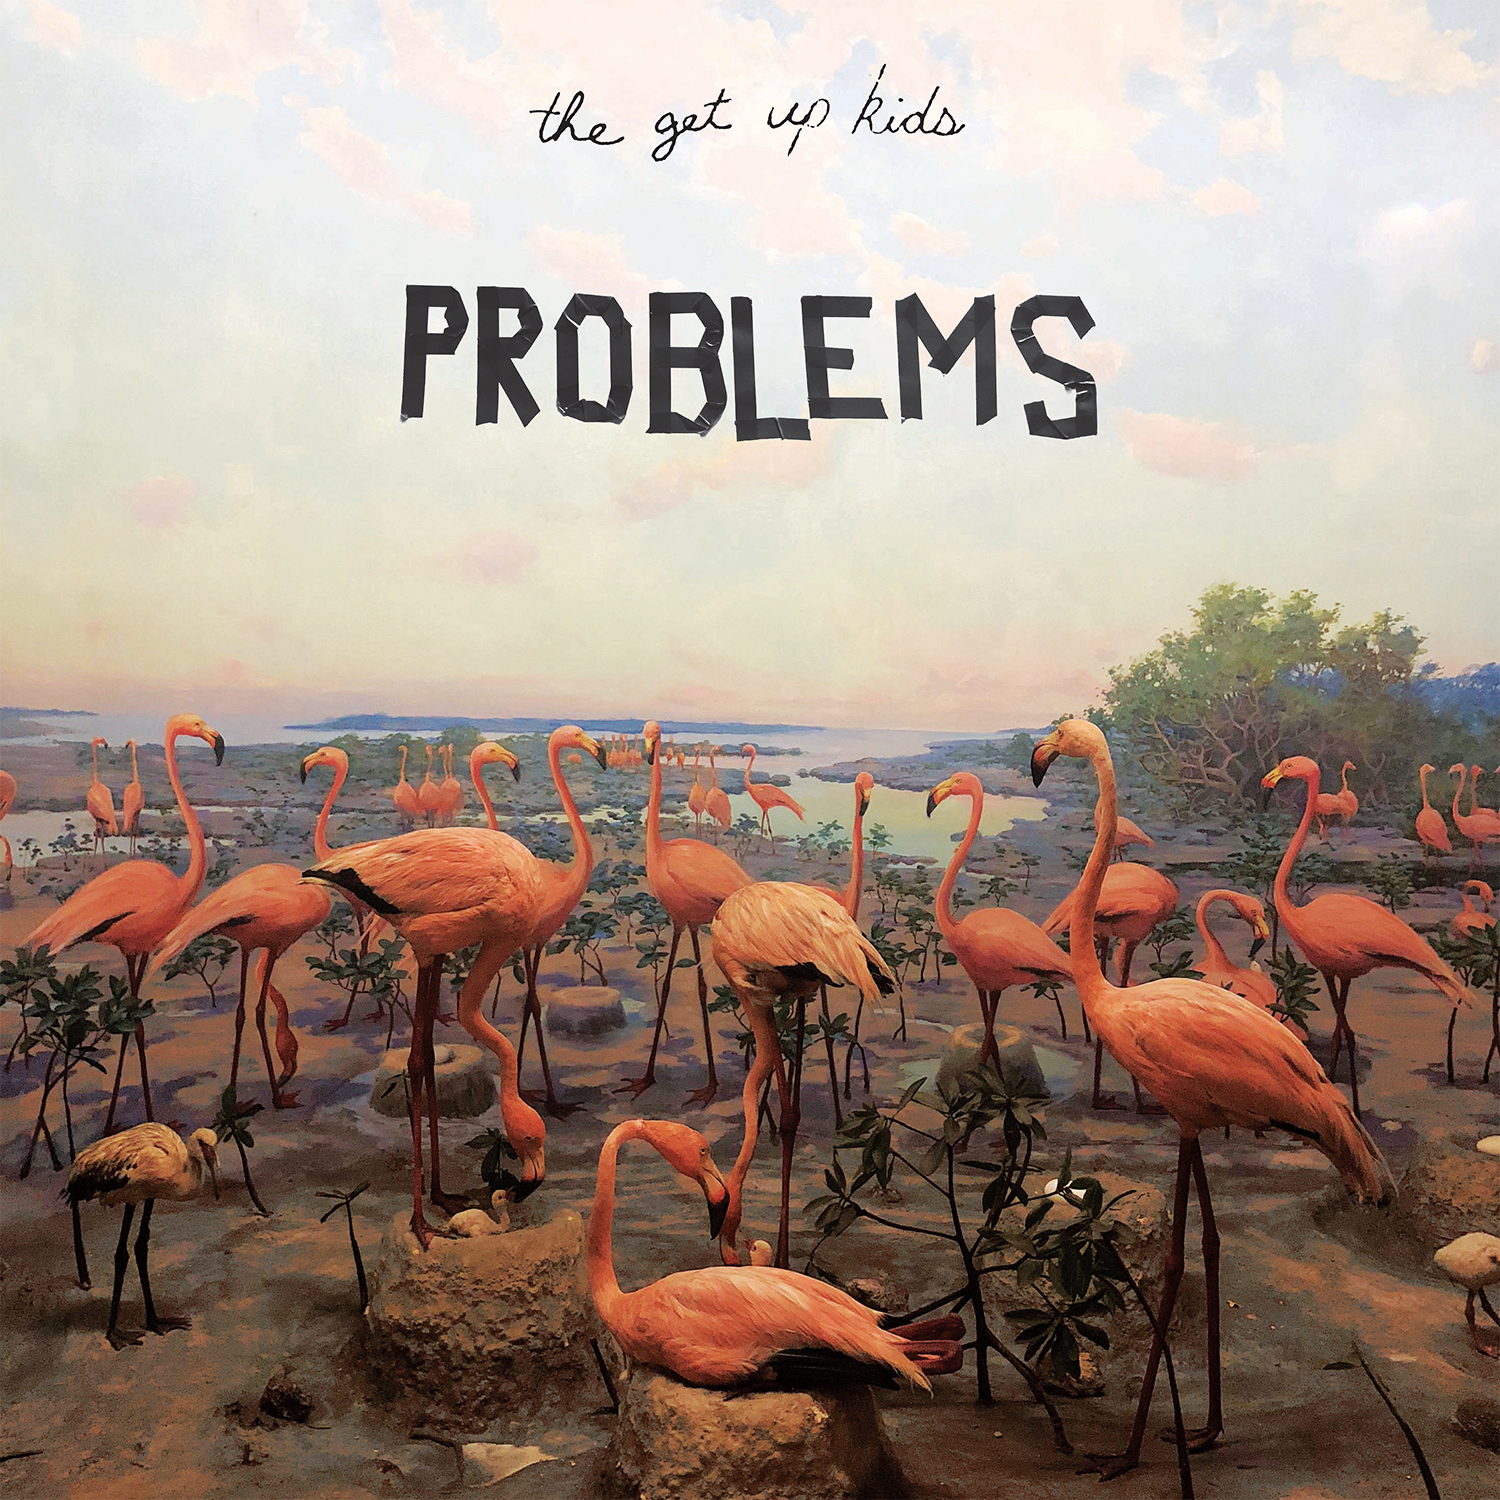 The Get Up Kids Album 'Problems' Available to Stream